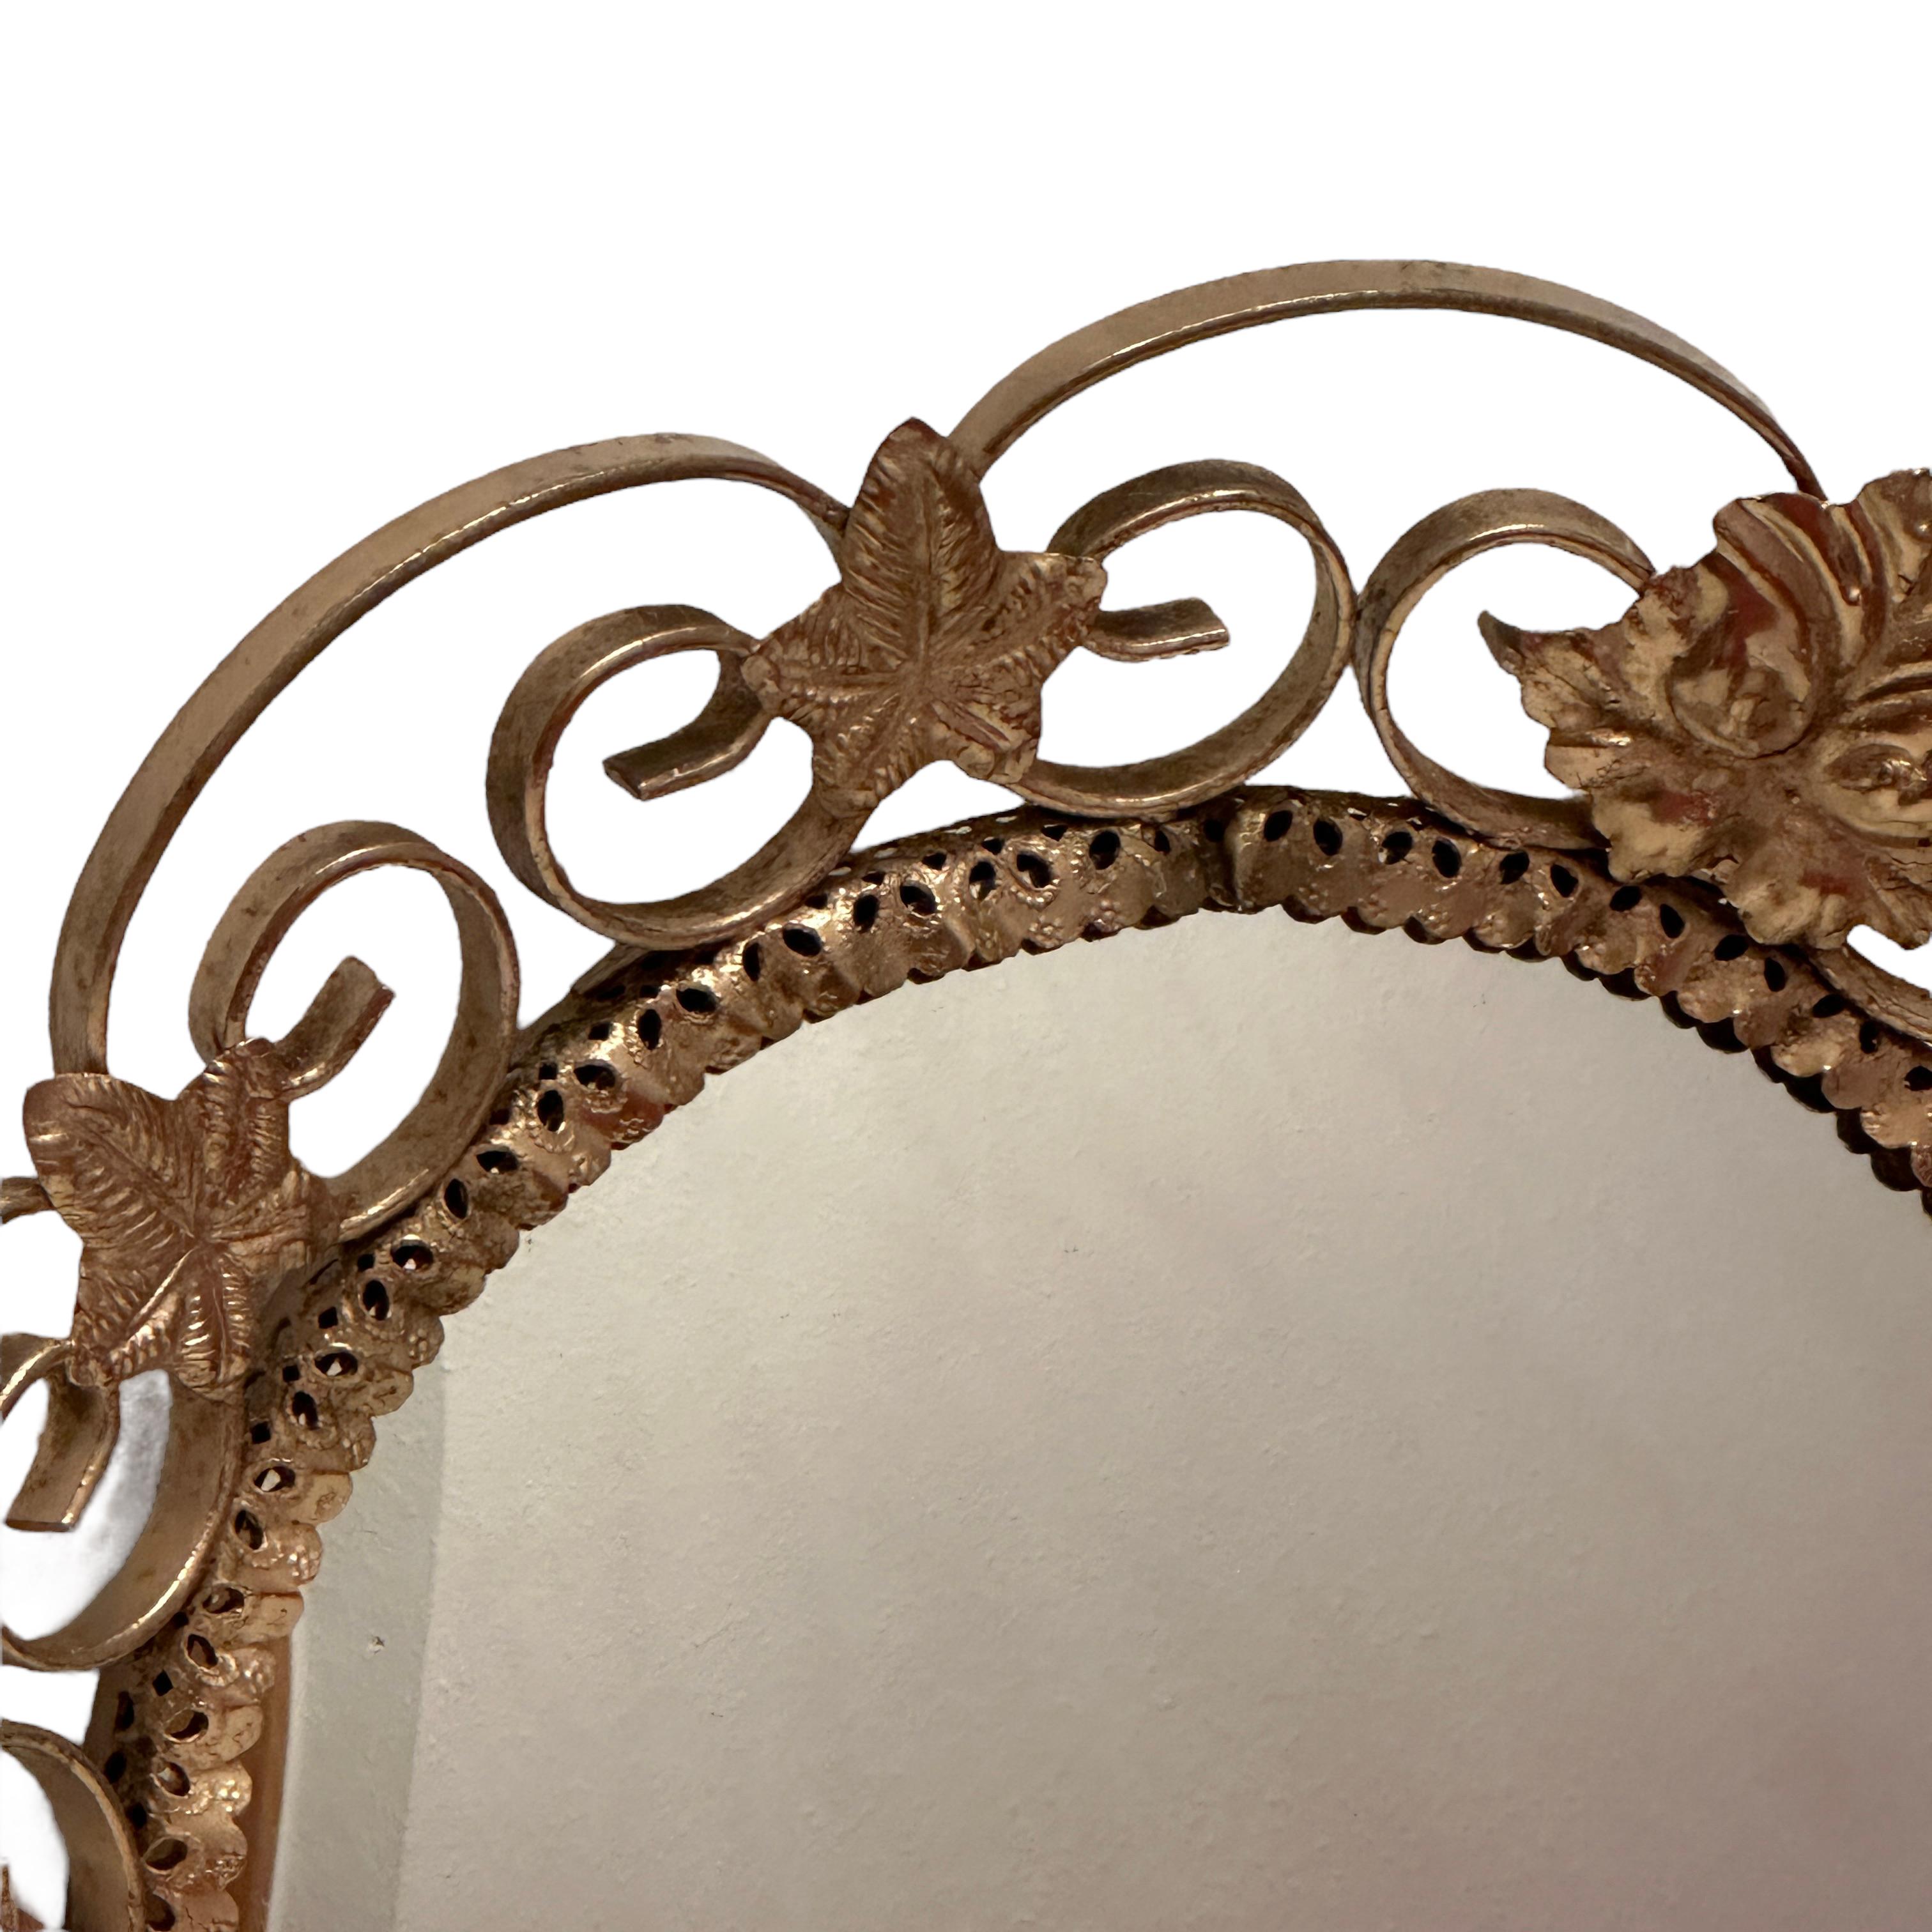 Gilt Vine Leaves Hollywood Regency Convex Wall Mirror, Toleware Tole 1960s Italy For Sale 1